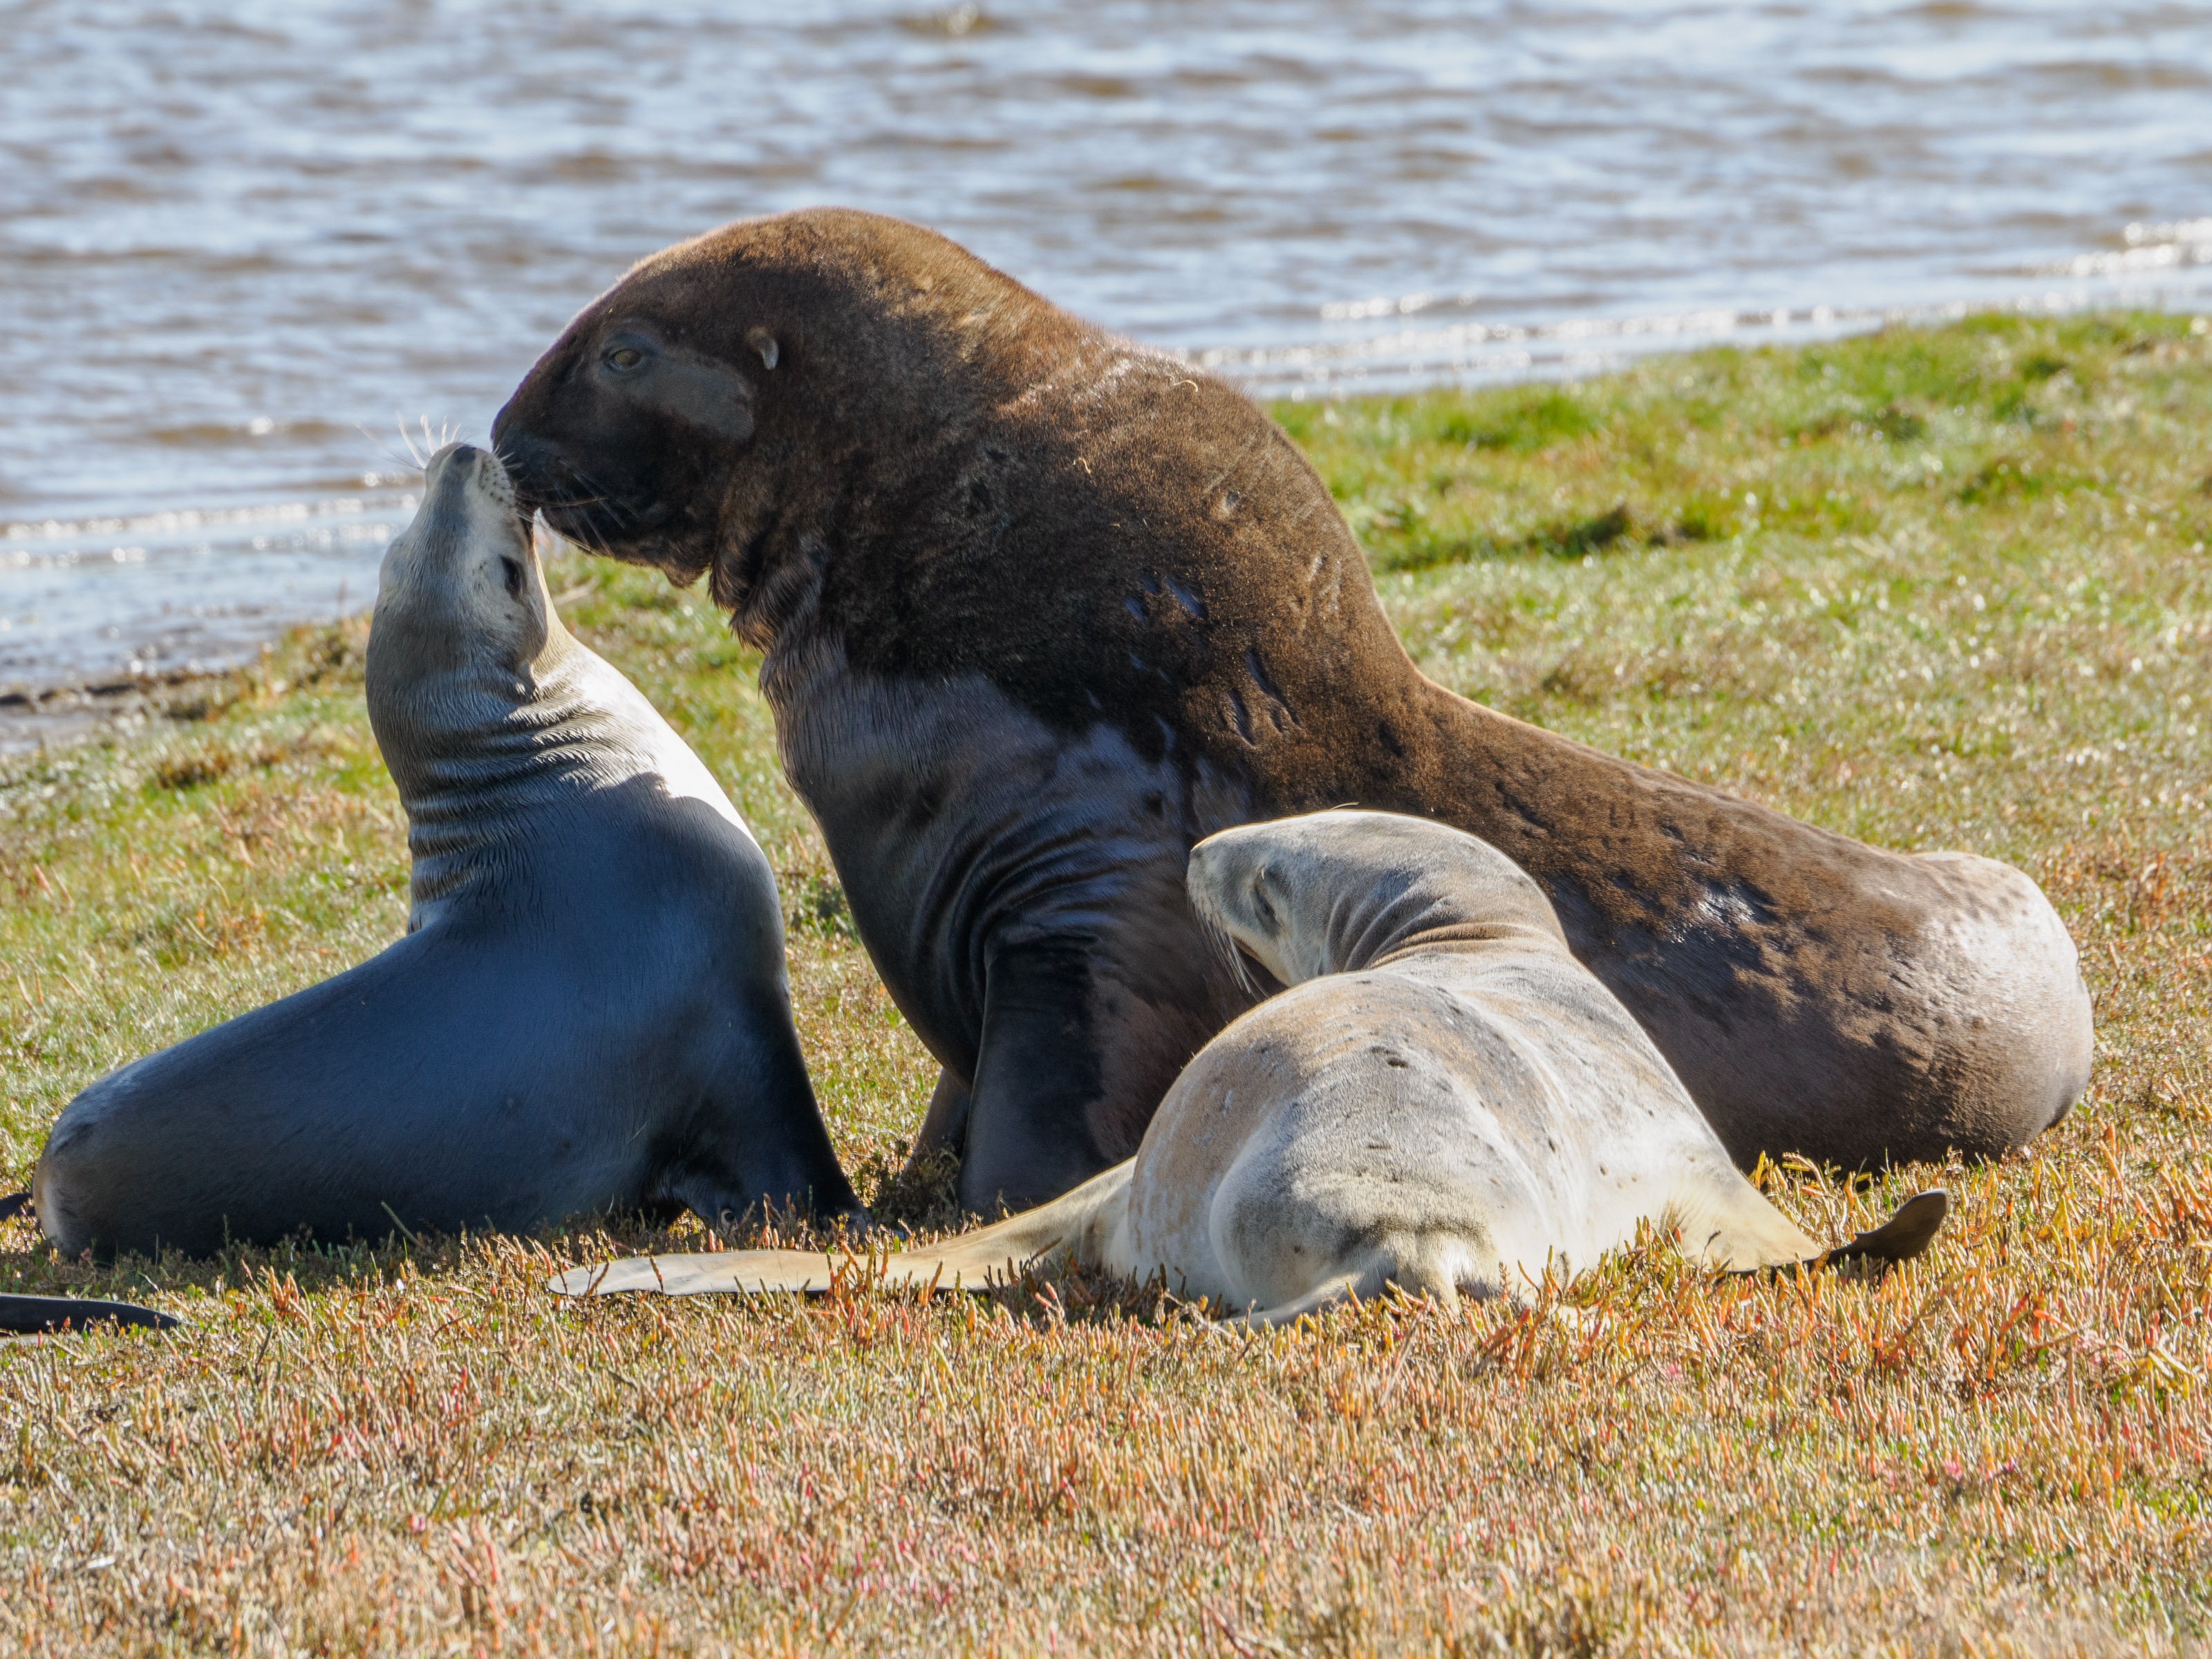 Large brown bull sea lion looming over smaller gray cow on grassy bank next to water